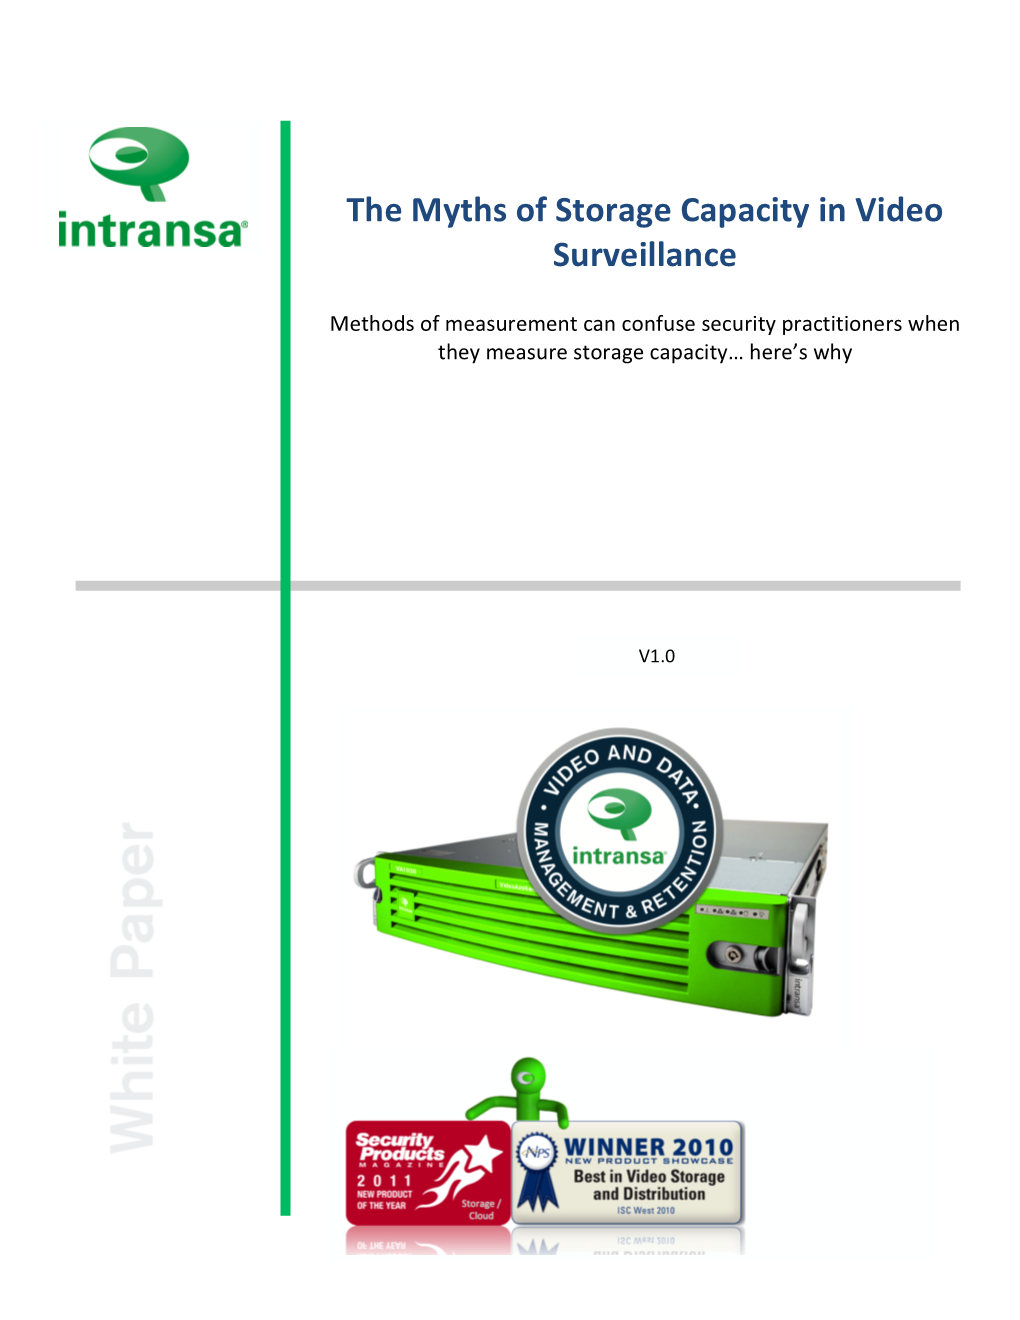 The Myths of Storage Capacity in Video Surveillance